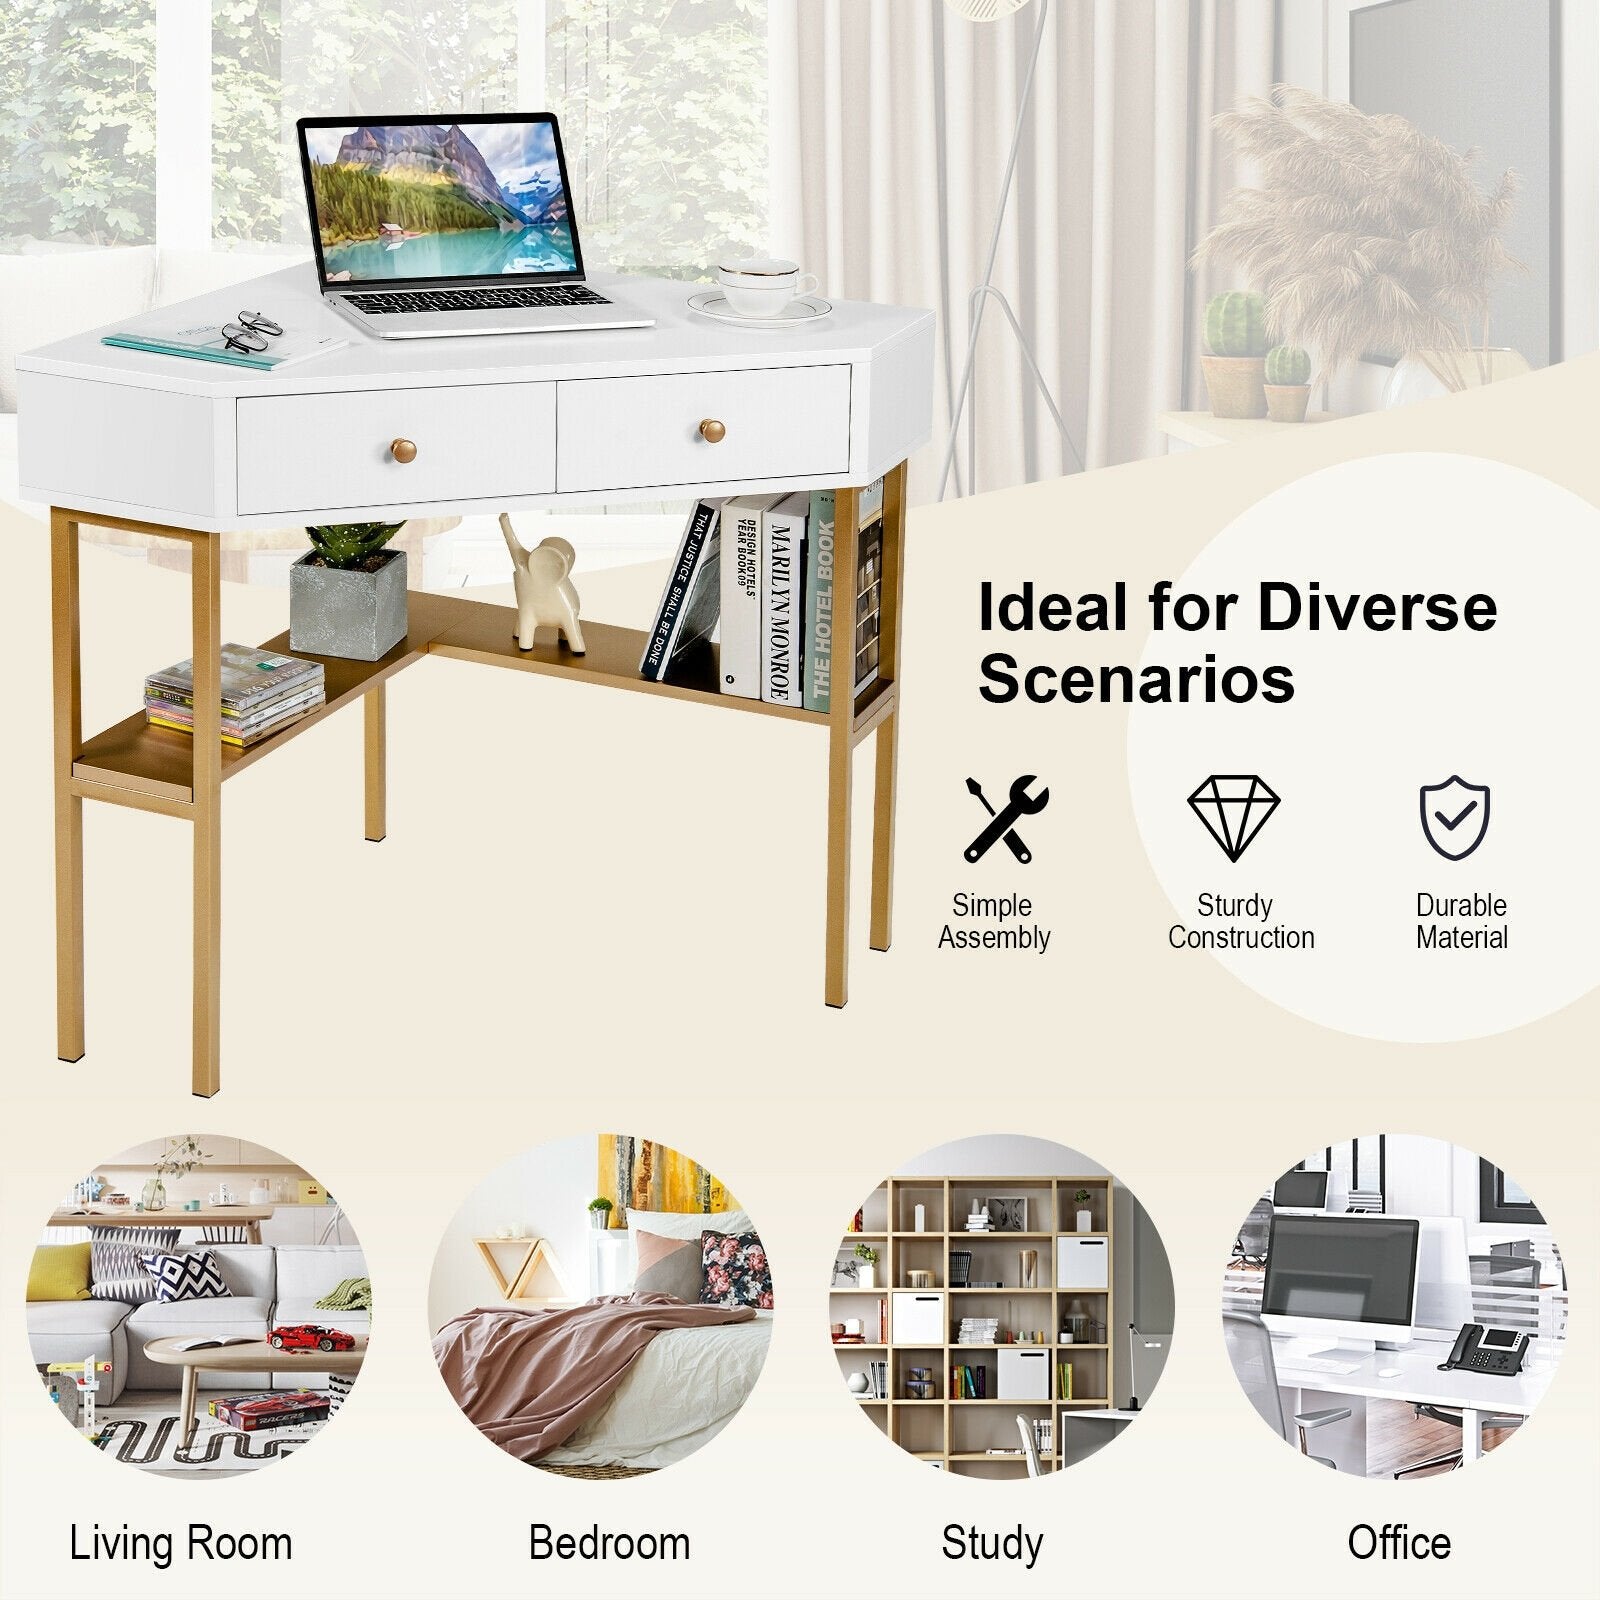 Space Saving Corner Computer Desk with 2 Large Drawers and Storage Shelf, Golden - Gallery Canada